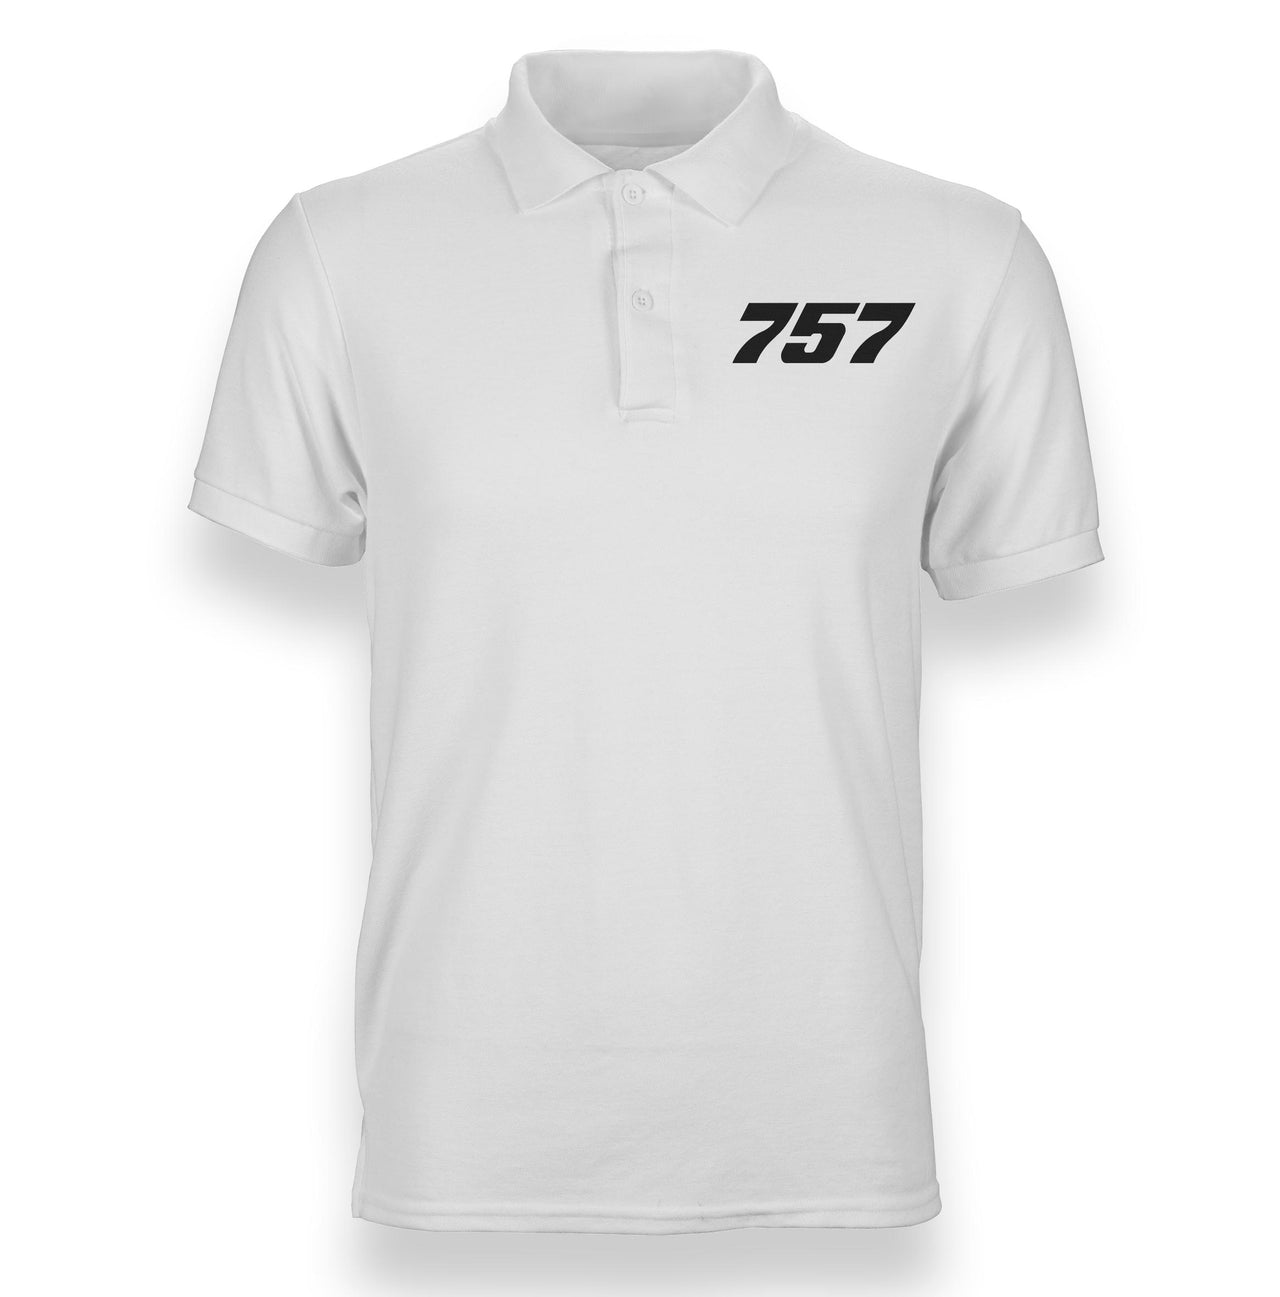 Boeing 757 Flat Text Designed Polo T-Shirts